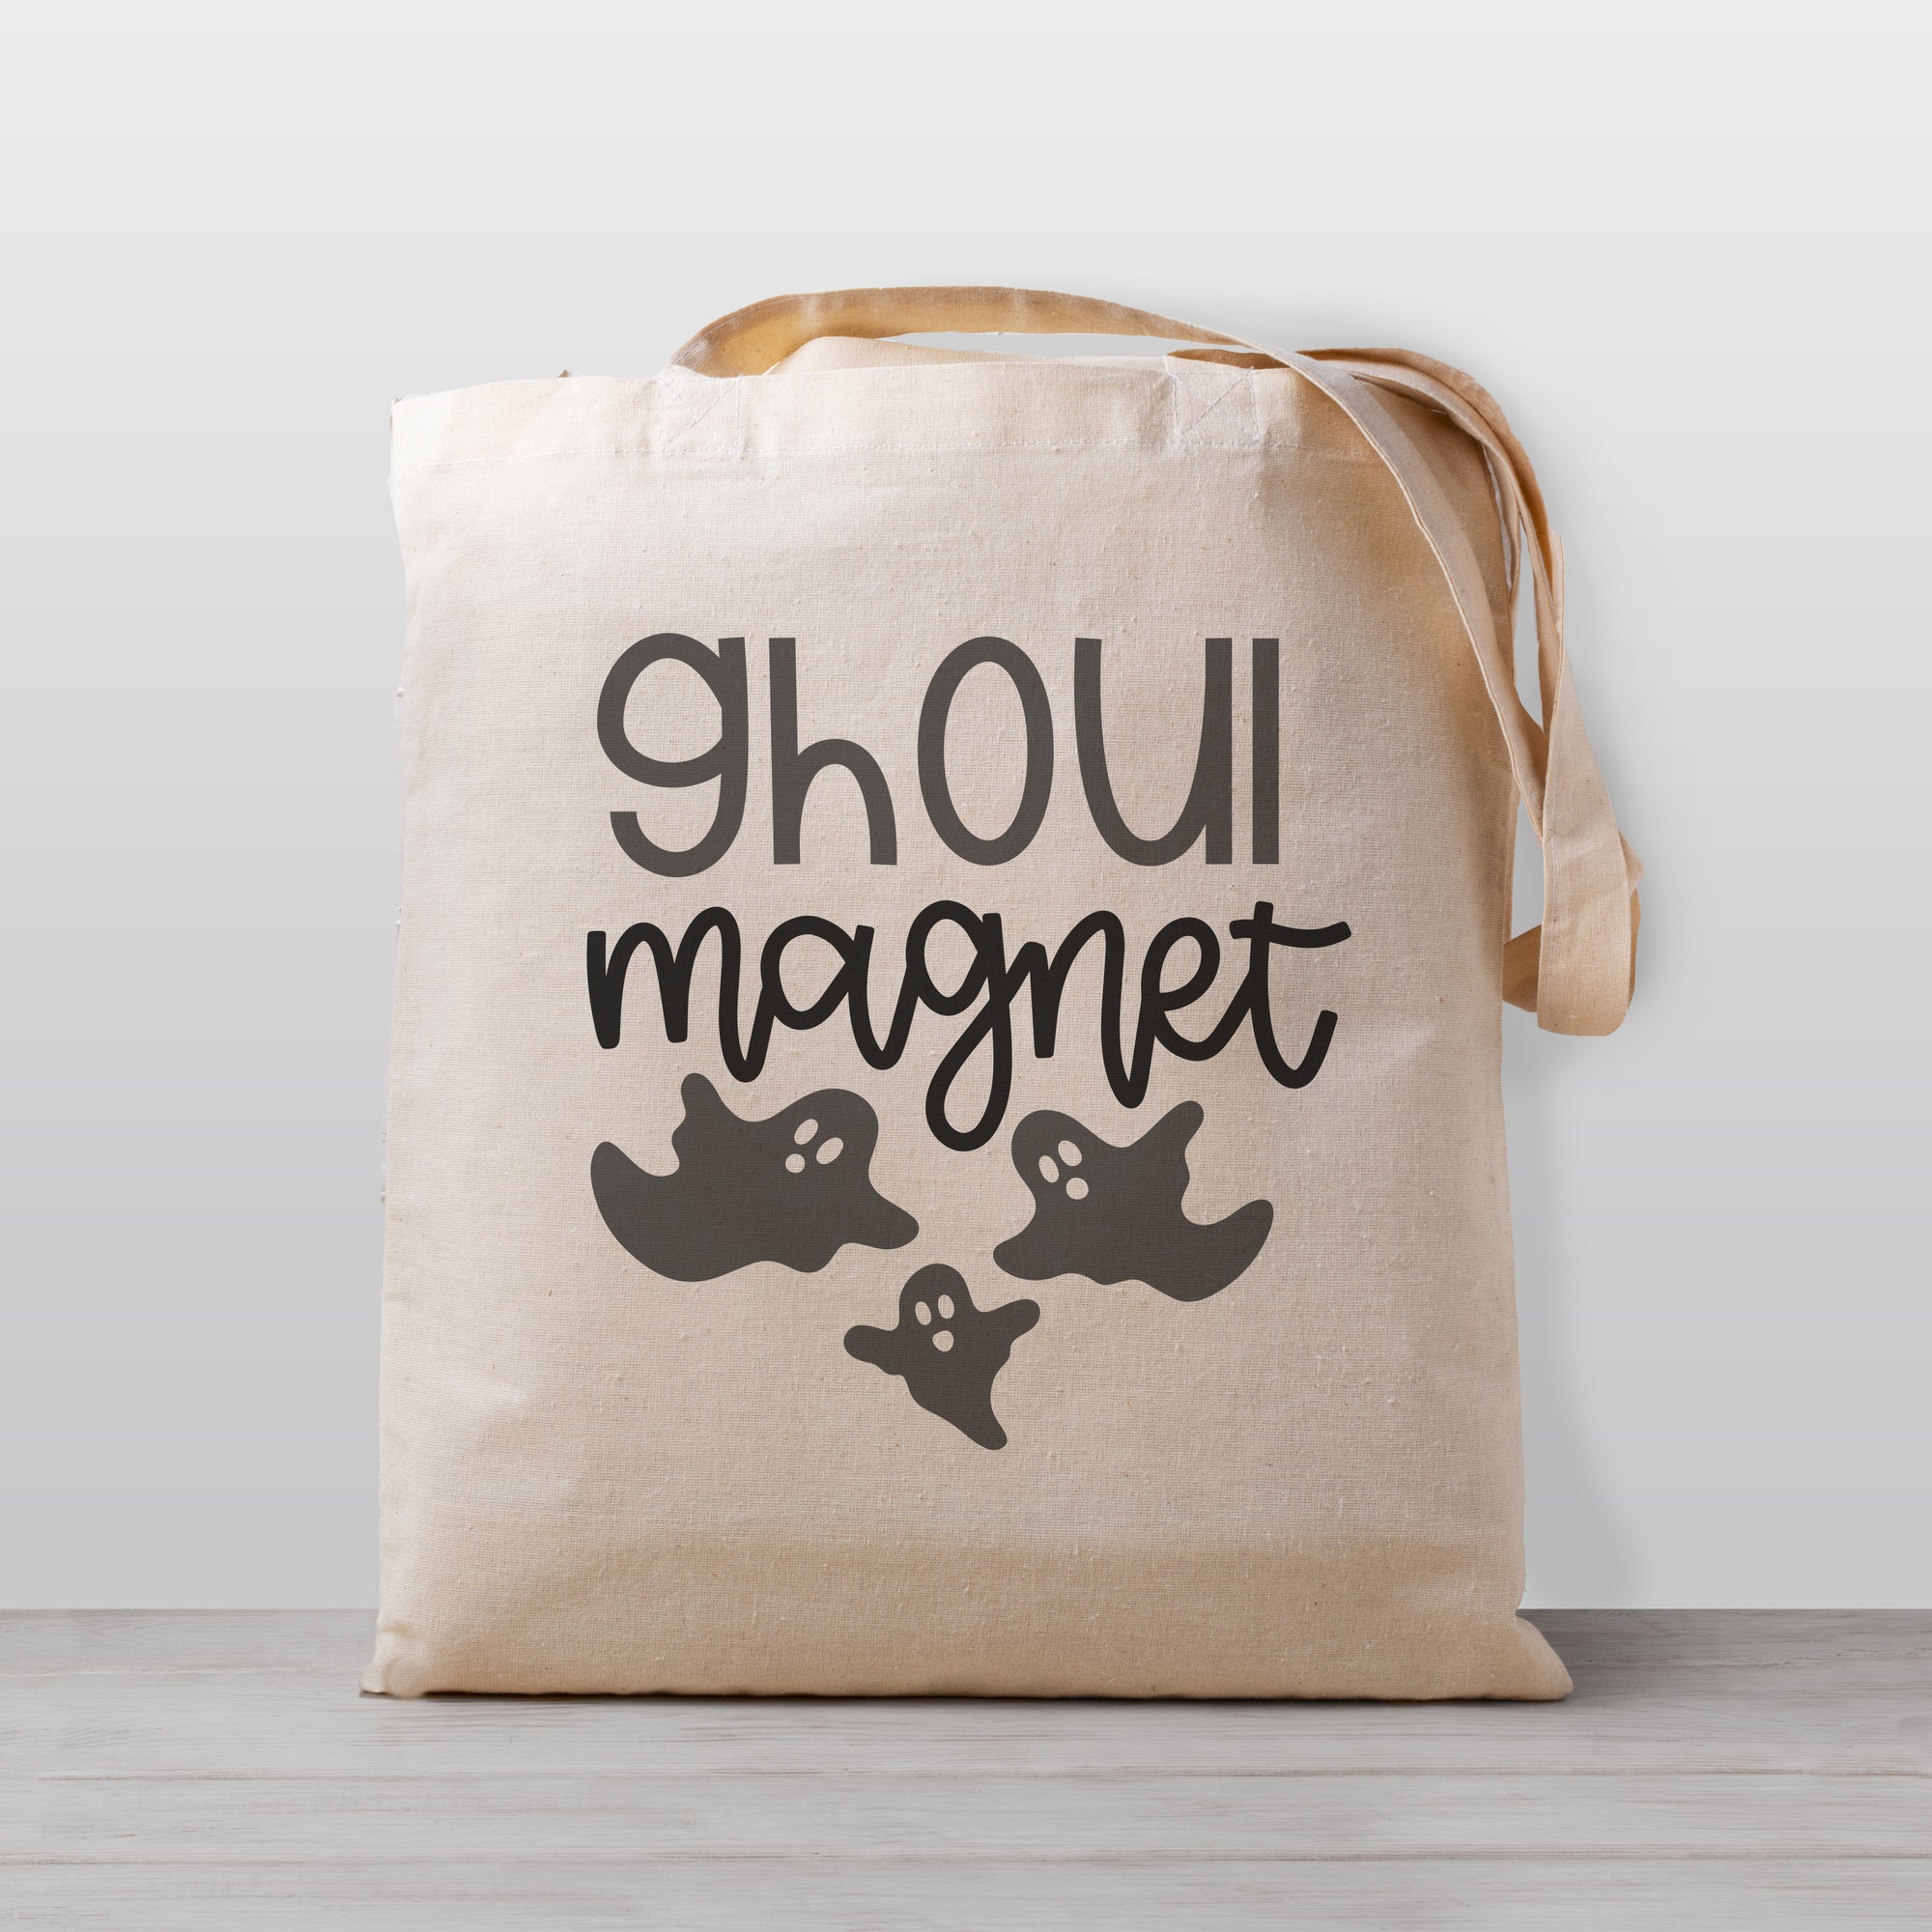 Ghoul Magnet Halloween Trick or Treat Tote Bag, 100% natural cotton canvas